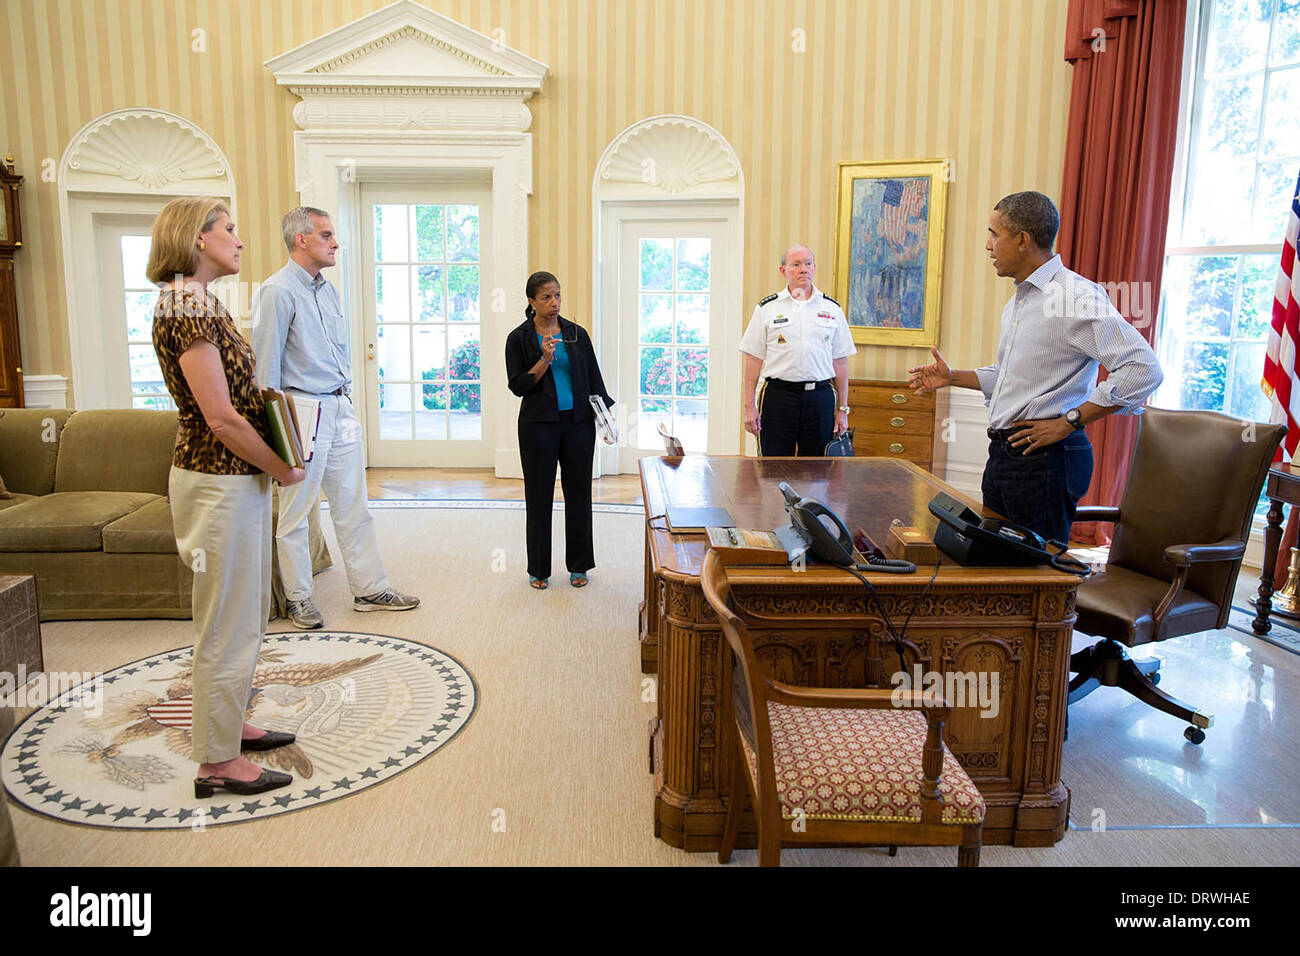 US President Barack Obama discusses the situation in Syria with senior advisors in the Oval Office of the White House August 24, 2013 in Washington, DC. Standing from left are: Karen Donfried, Senior Director for European Affairs; Chief of Staff Denis McDonough; National Security Advisor Susan E. Rice; and Gen. Martin Dempsey, Chairman of the Joints Chiefs of Staff. Stock Photo